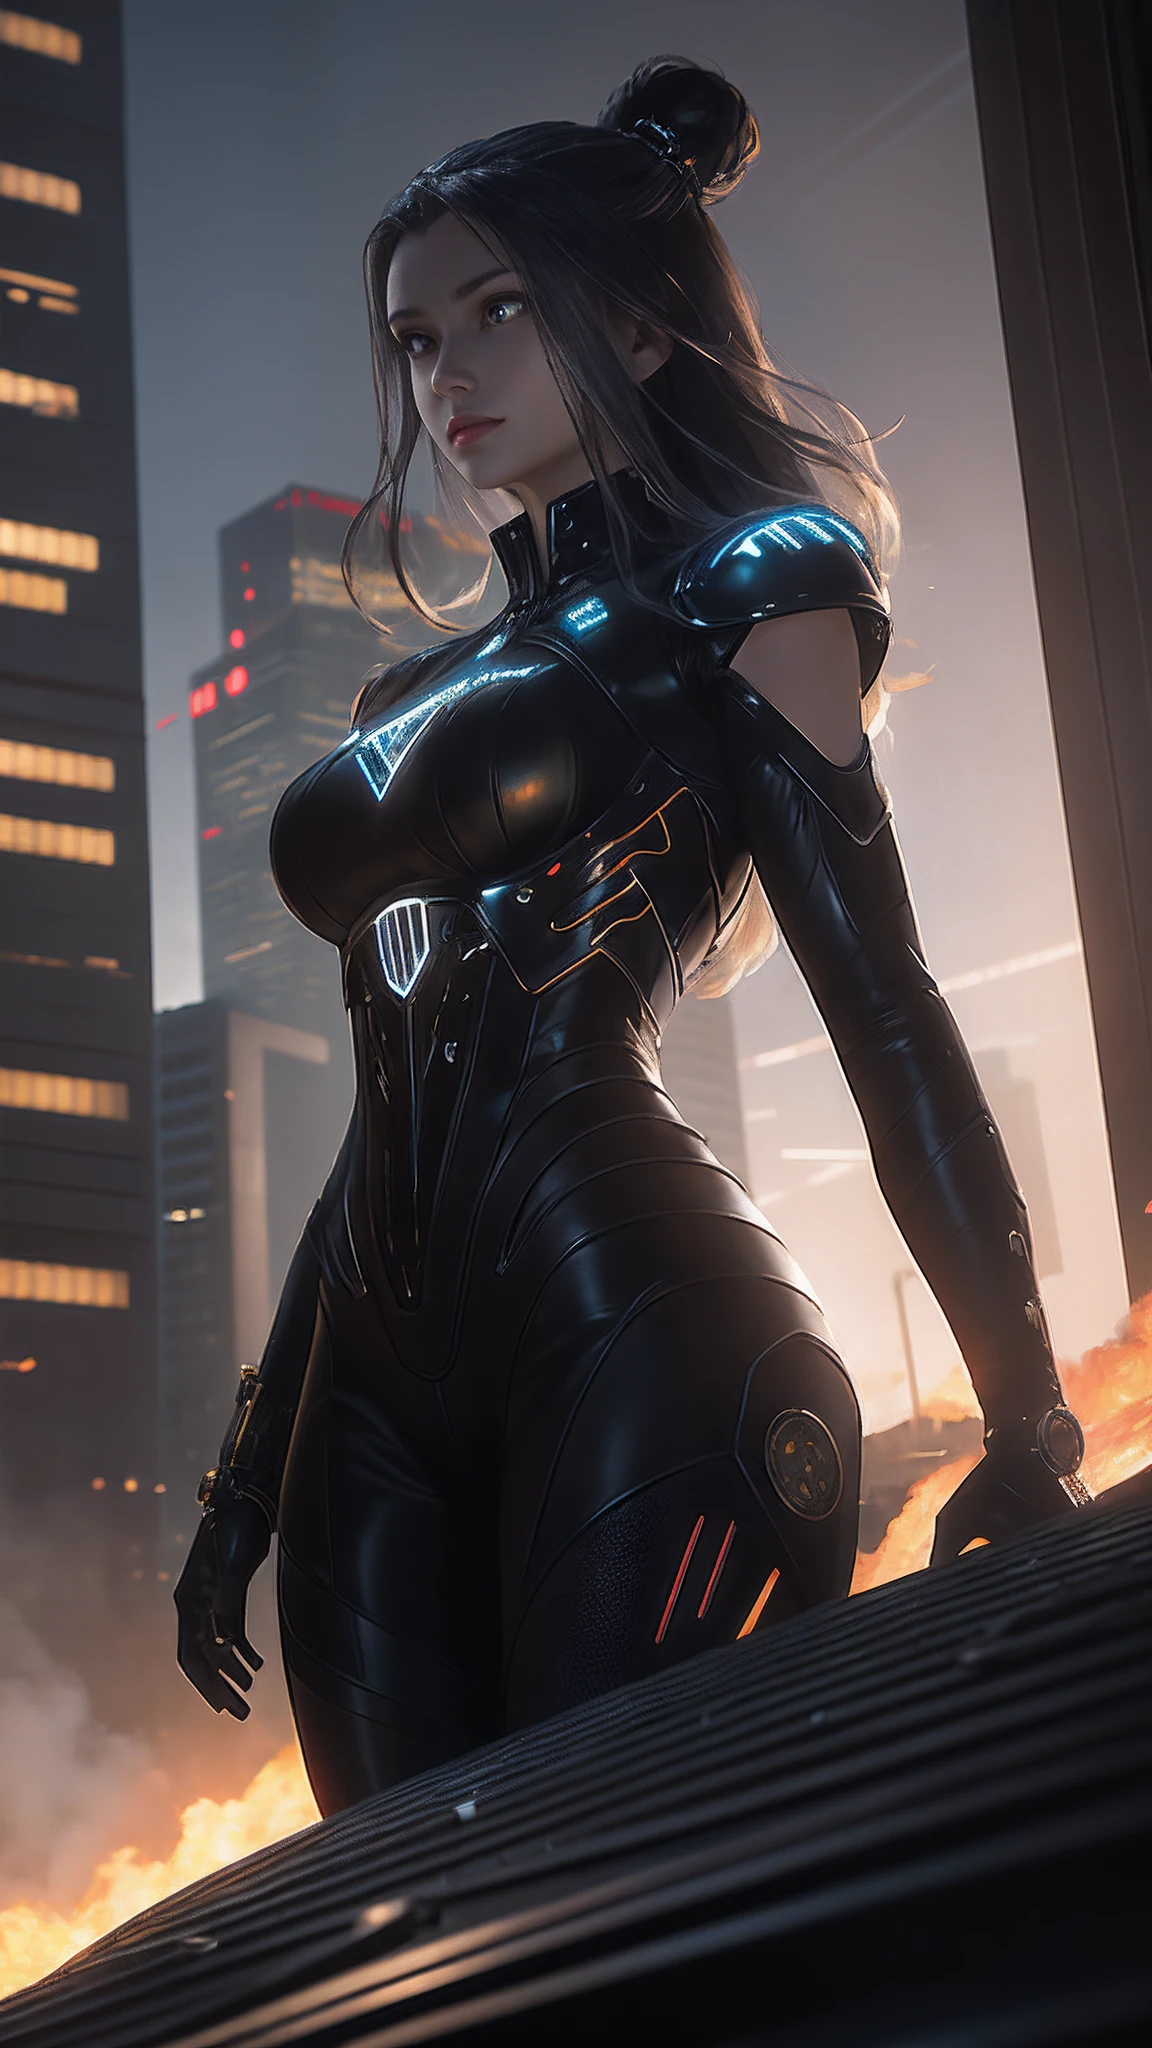 （（best qualtiy））， （（tmasterpiece））， （（Realistic））， （A detailed）， （realisticlying：1.5）， A futuristic girl， （Thick stature）， （black reotard）， Lights on armor， Cybernetic headdress， looking at viewert， dynamicposes， postapocalyptic， Destroyed city background， Buildings on fire， scientific fiction， HDR， Ray traching， nvidia RTX， Hyper-Resolution， Unreal 5， sub surface scattering， PBR textures， Post-processing， Anisotropic filtering， depth of fields， Maximum clarity and sharpness， trichotomy，8K original，（Luminous Particle：1.4），（VerydetailedCG，Unity 8k Wallpaper，3d，cinmatic lighting，lens flare glow），Reflectors，Sharp focus，Cyberpunk art of a，Cyberpunk Building，